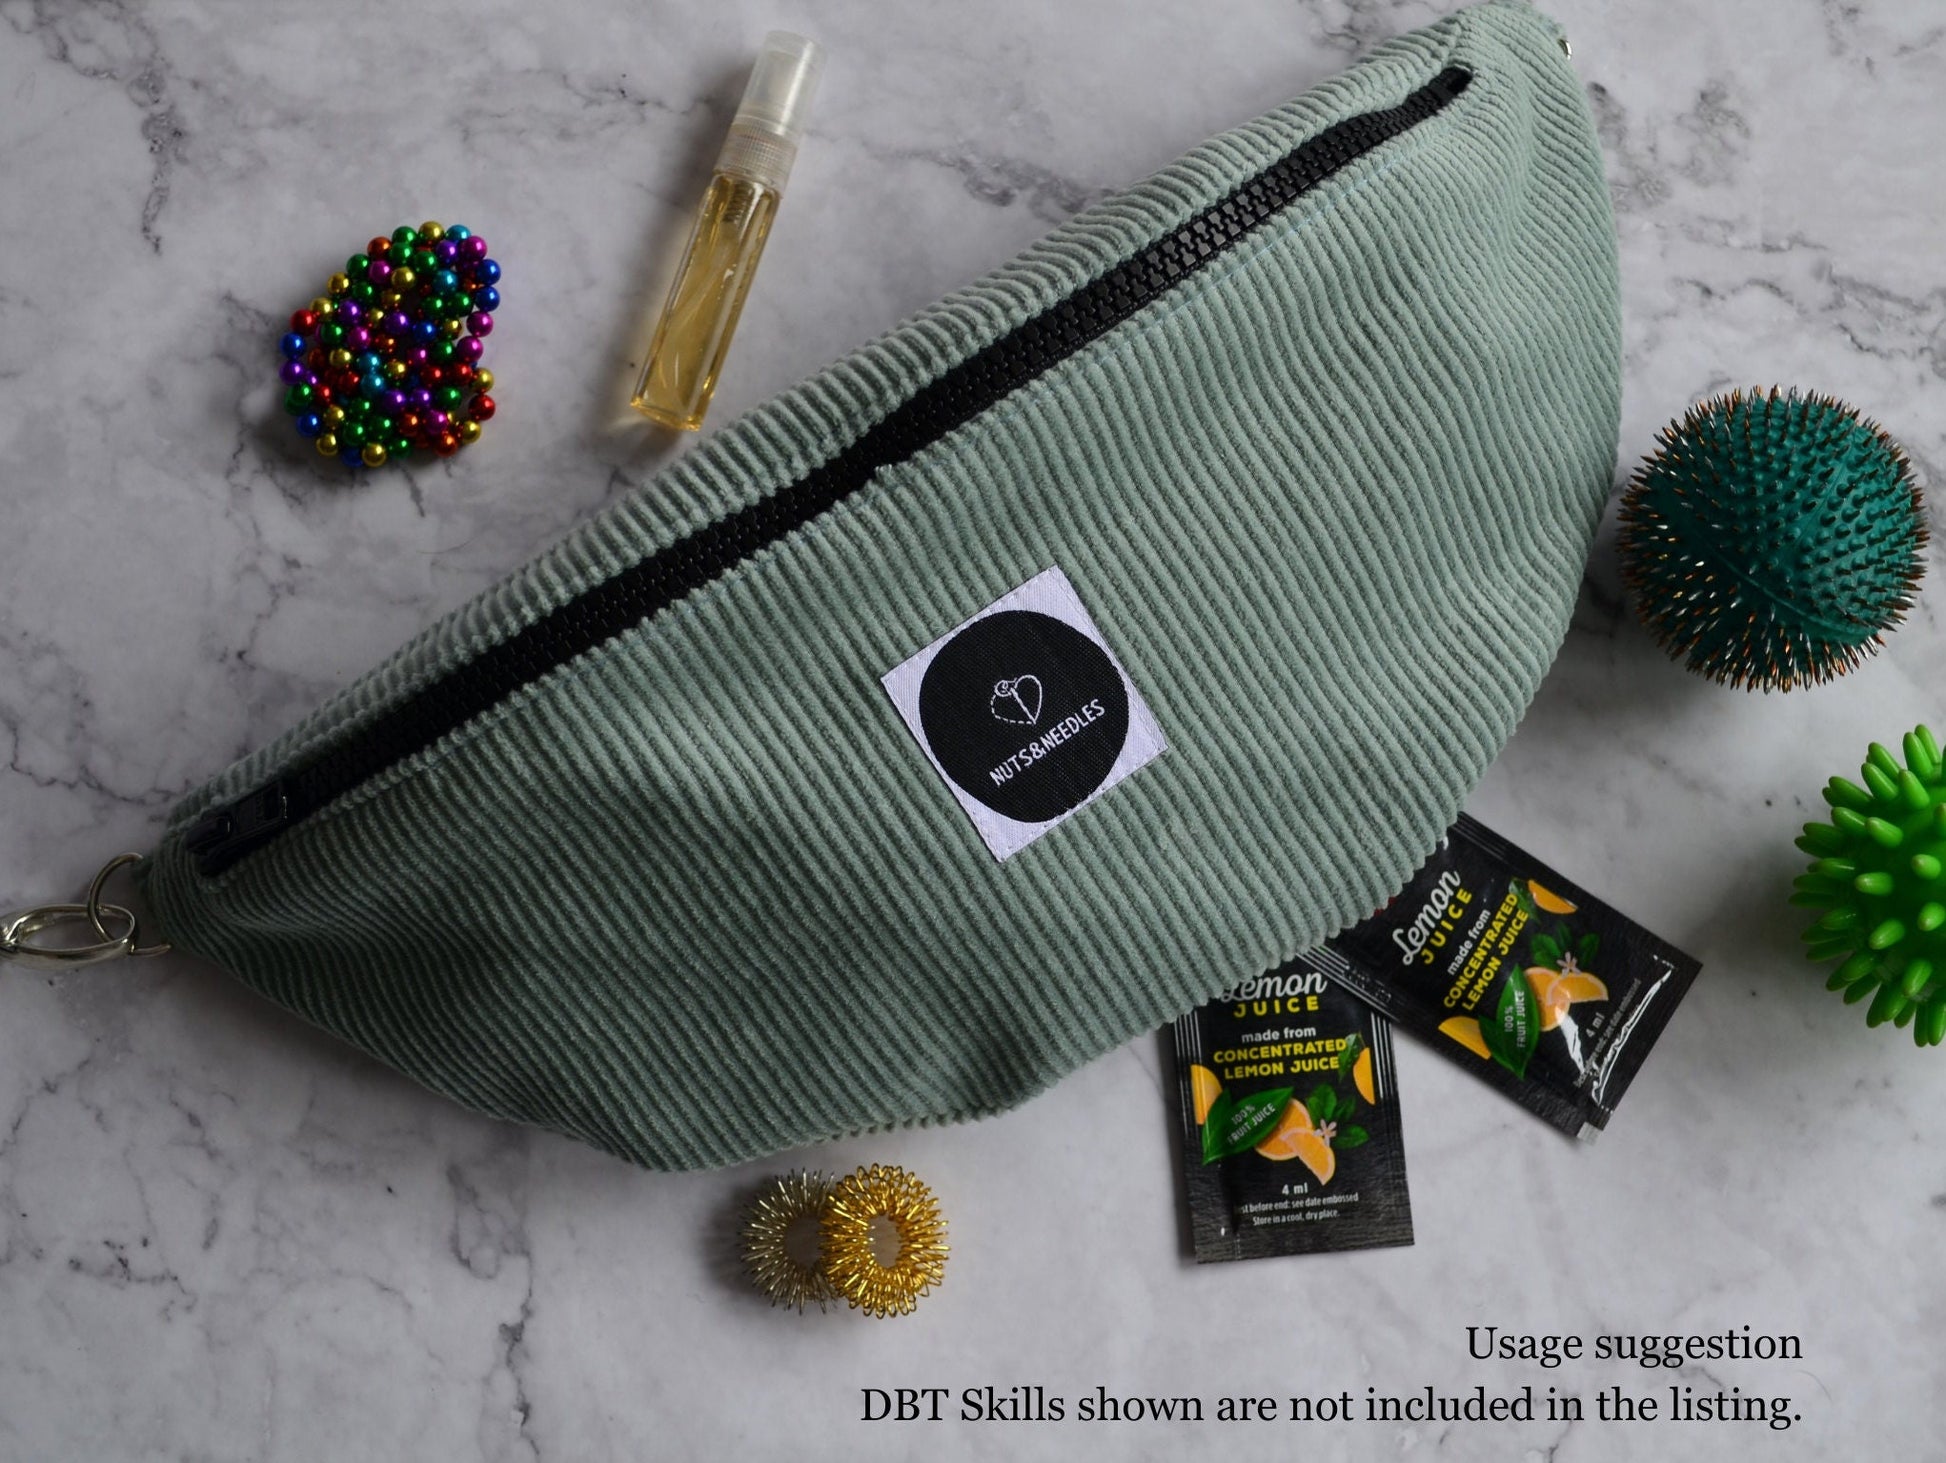 Skills Bag Anxiety Awareness, part of profit donated to charity, Mental Health, handmade Fanny Pack for fidget toys, DBT Skill, Self Care